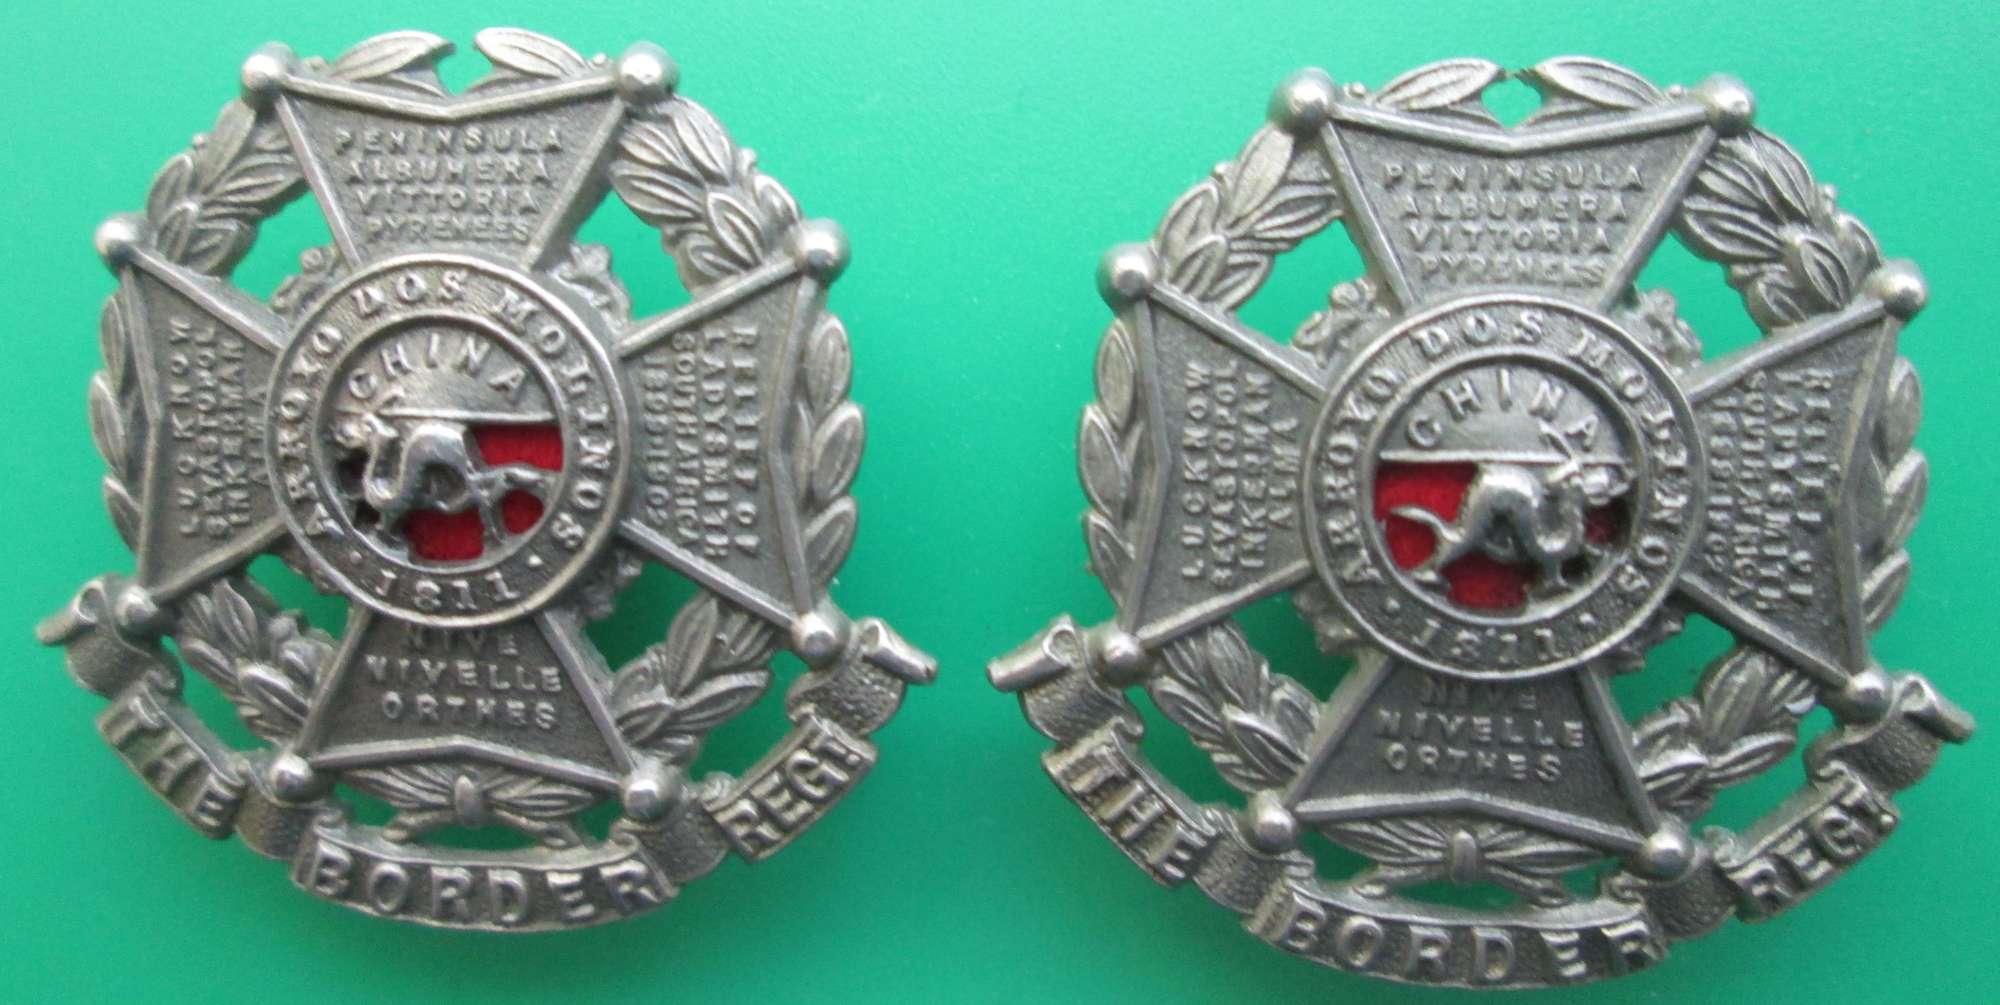 A PAIR OF THE BORDER REGIMENT OTHER RANKS COLLAR DOGS